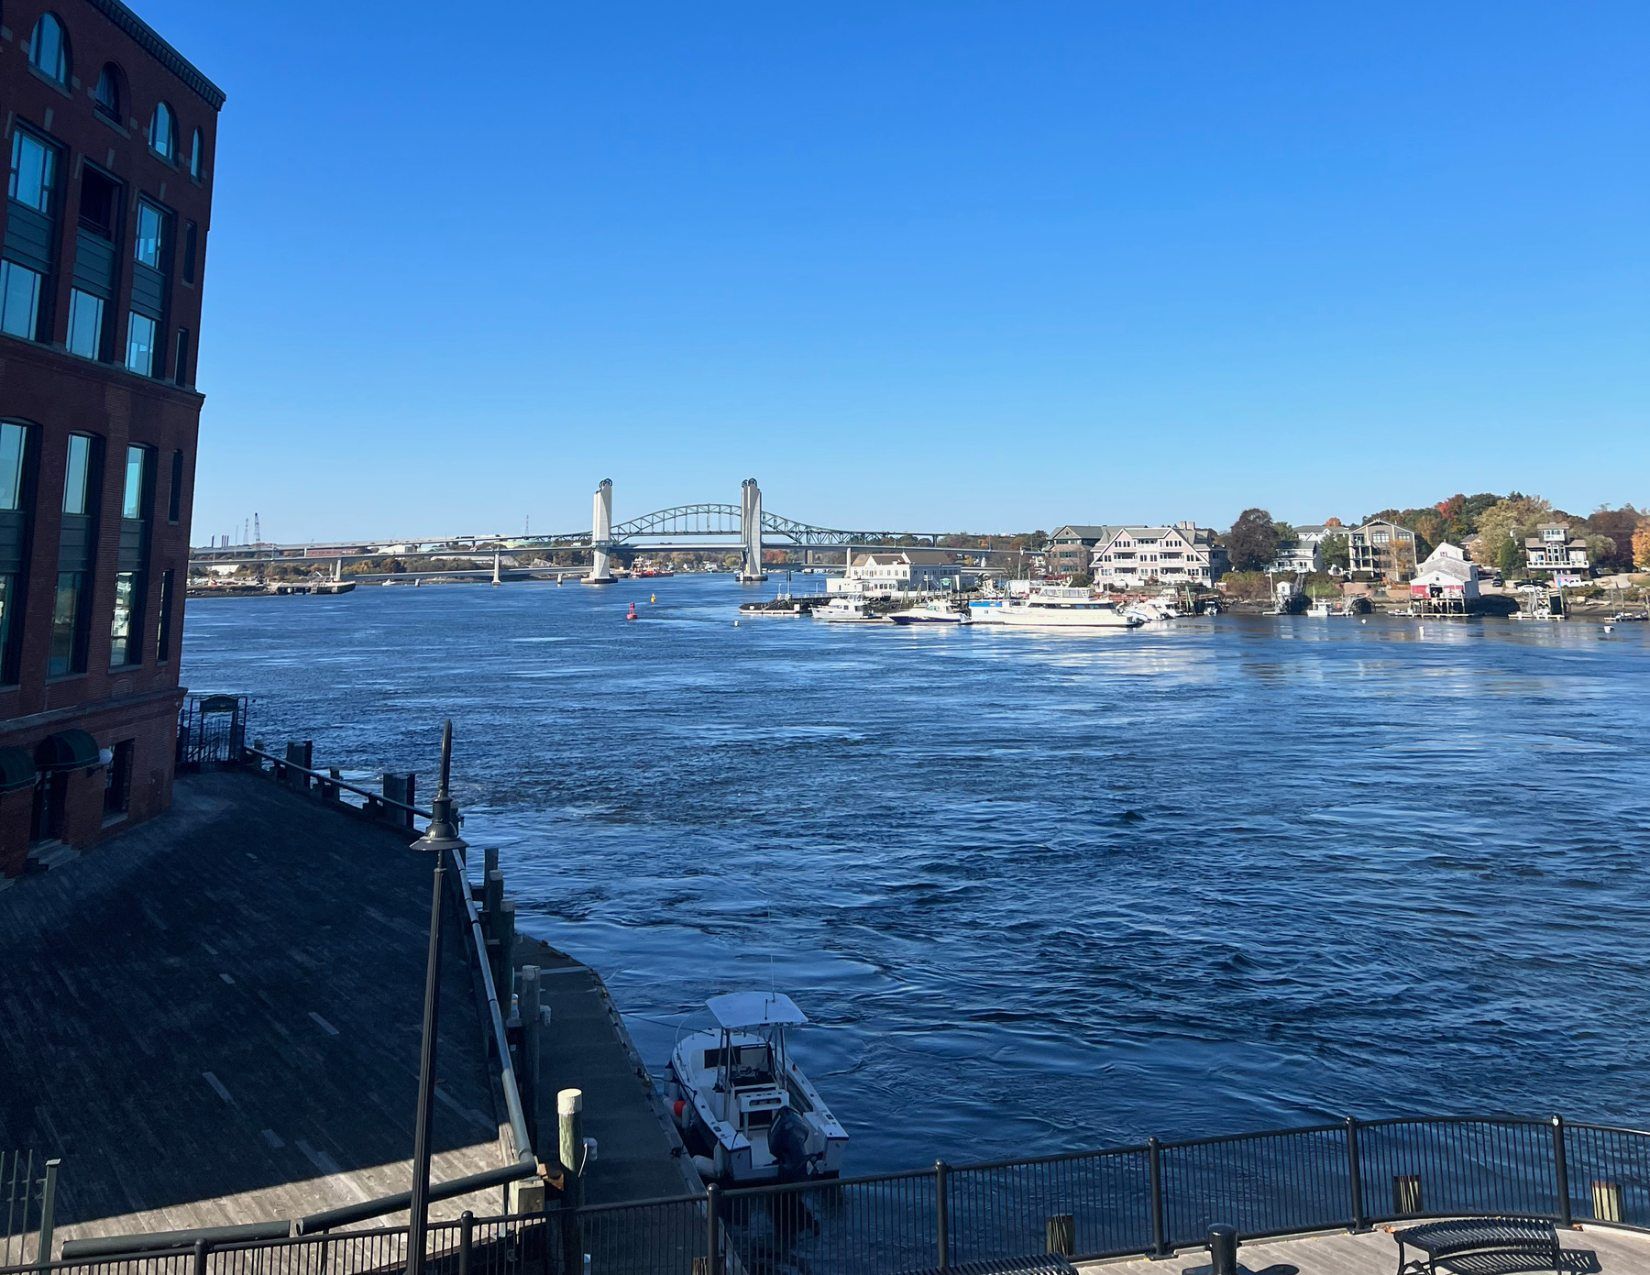 Calm deep blue waters on the Piscataqua River with colonial style homes in the distance and a view of Maine from the Memorial Bridge in Portsmouth, New Hampshire